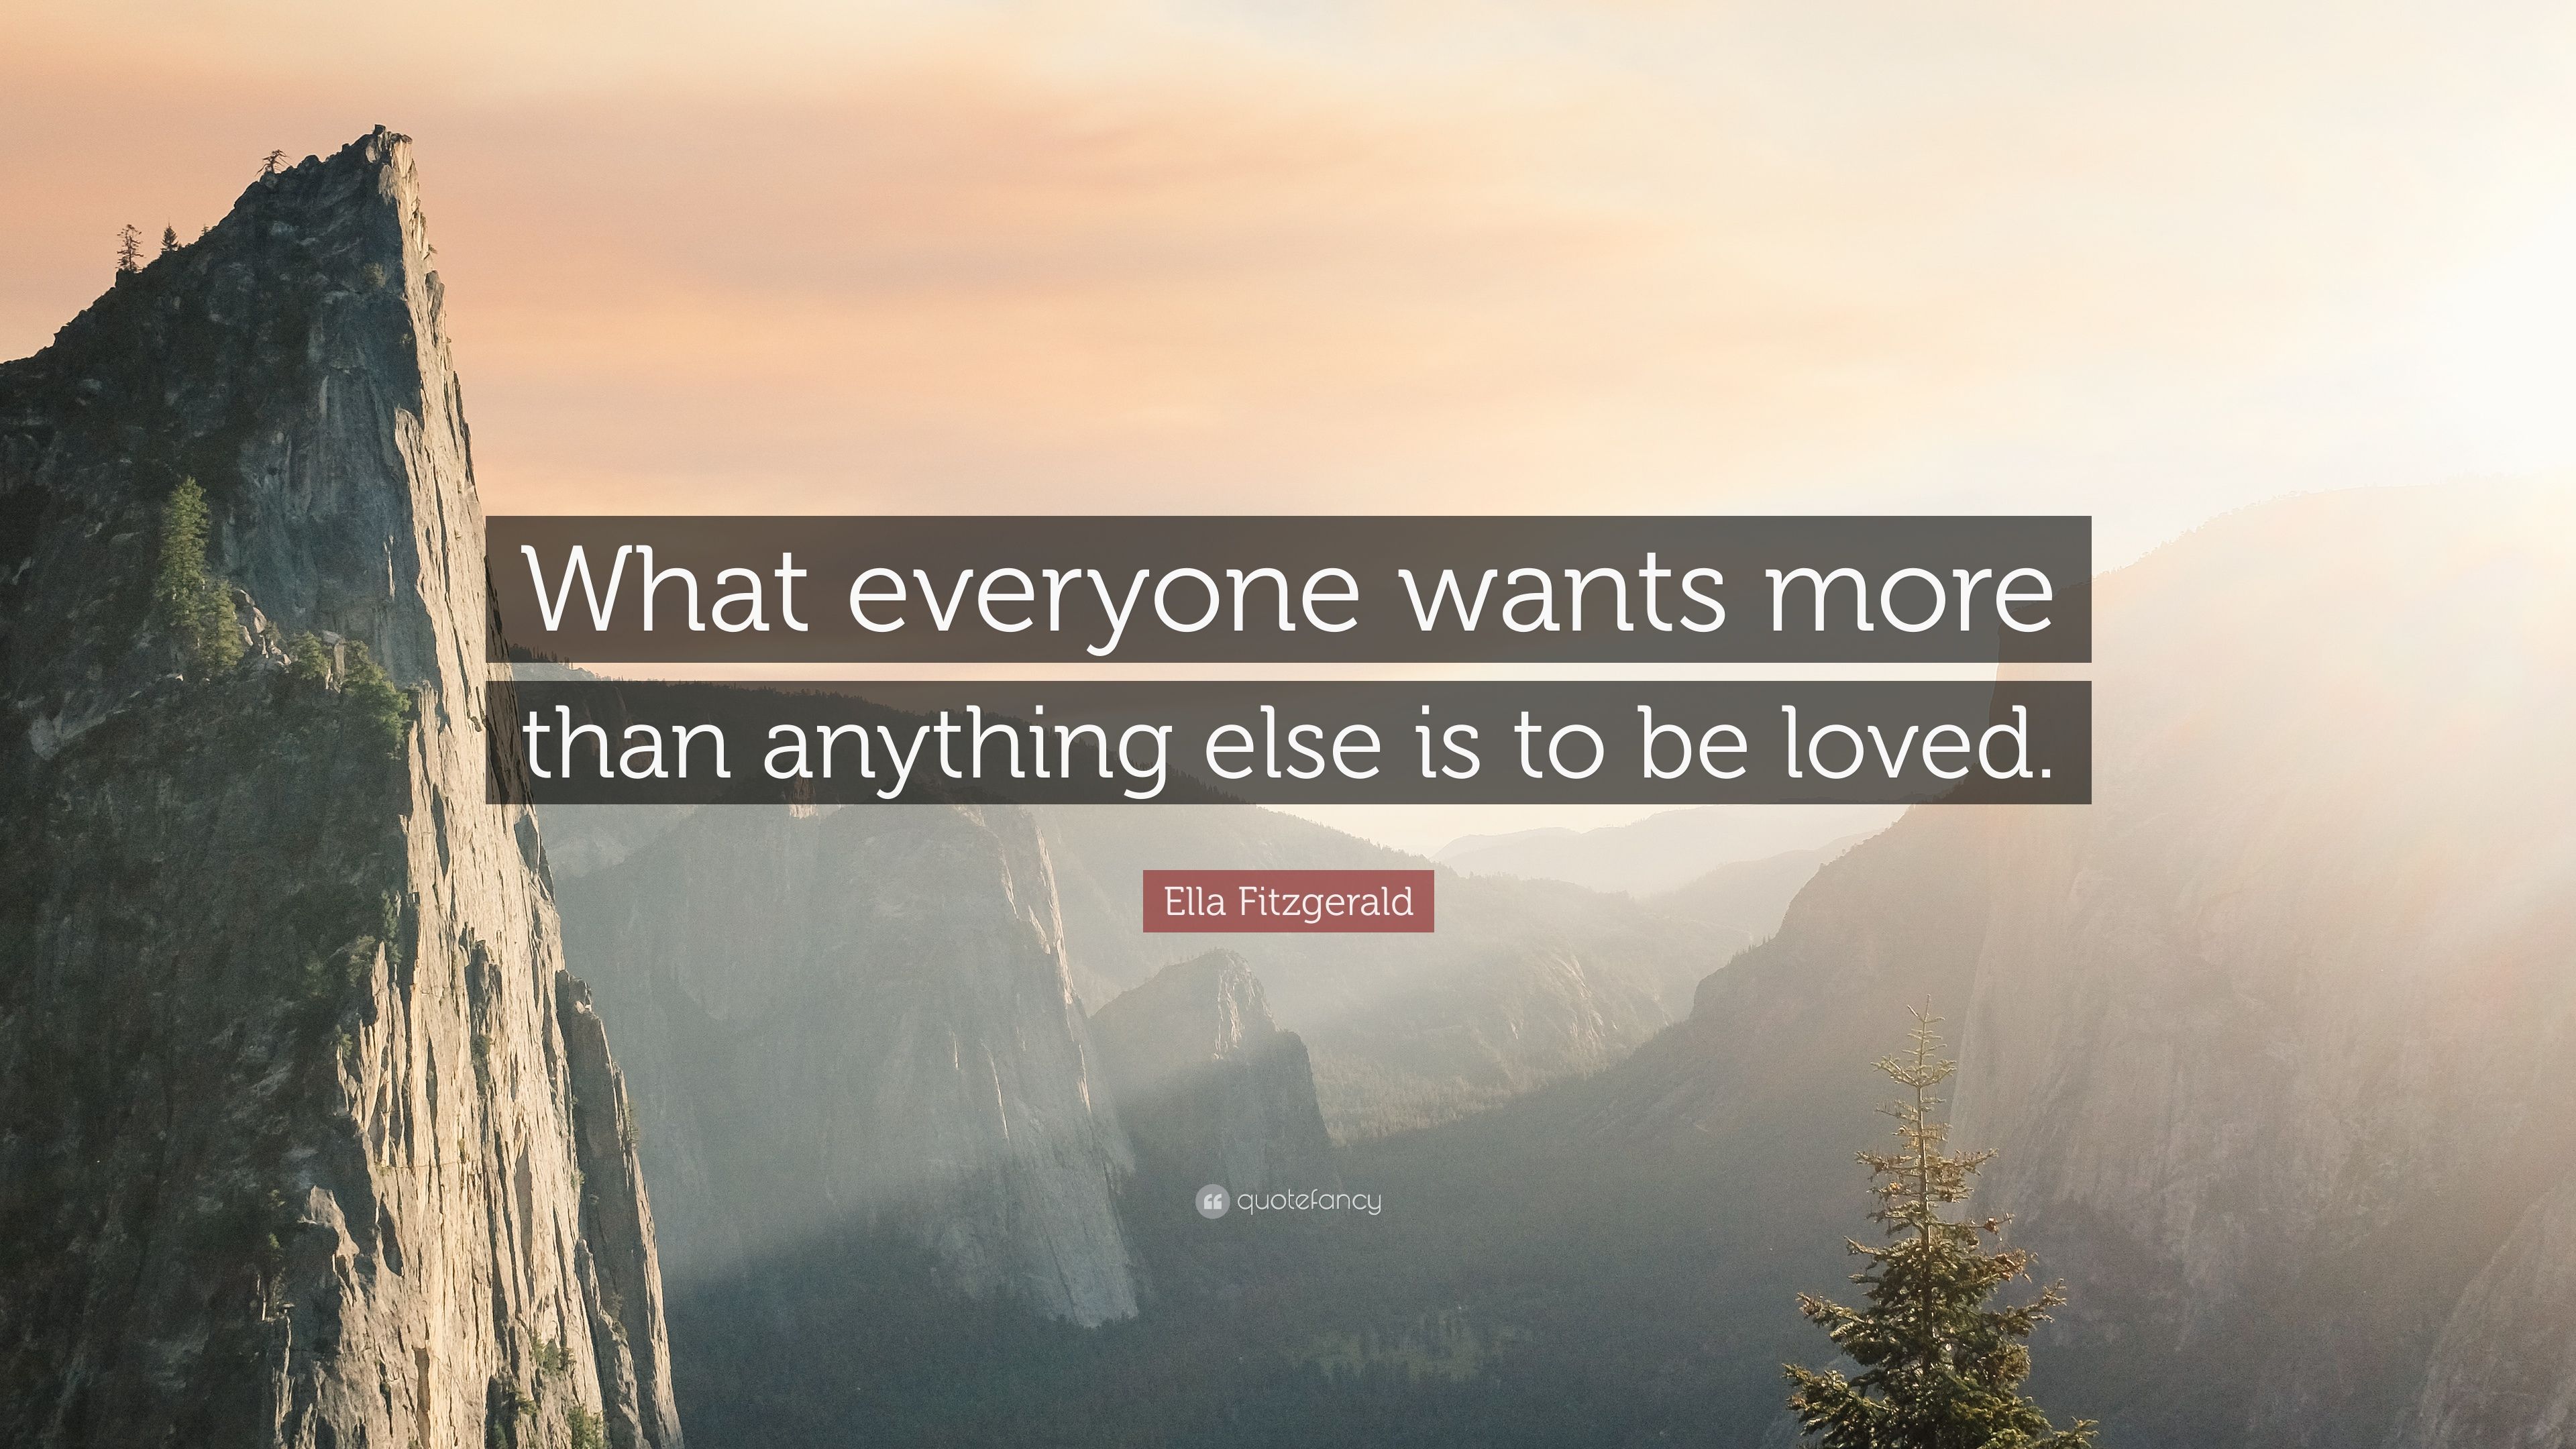 Ella Fitzgerald Quote: “What everyone wants more than anything else is to be loved.” (7 wallpaper)